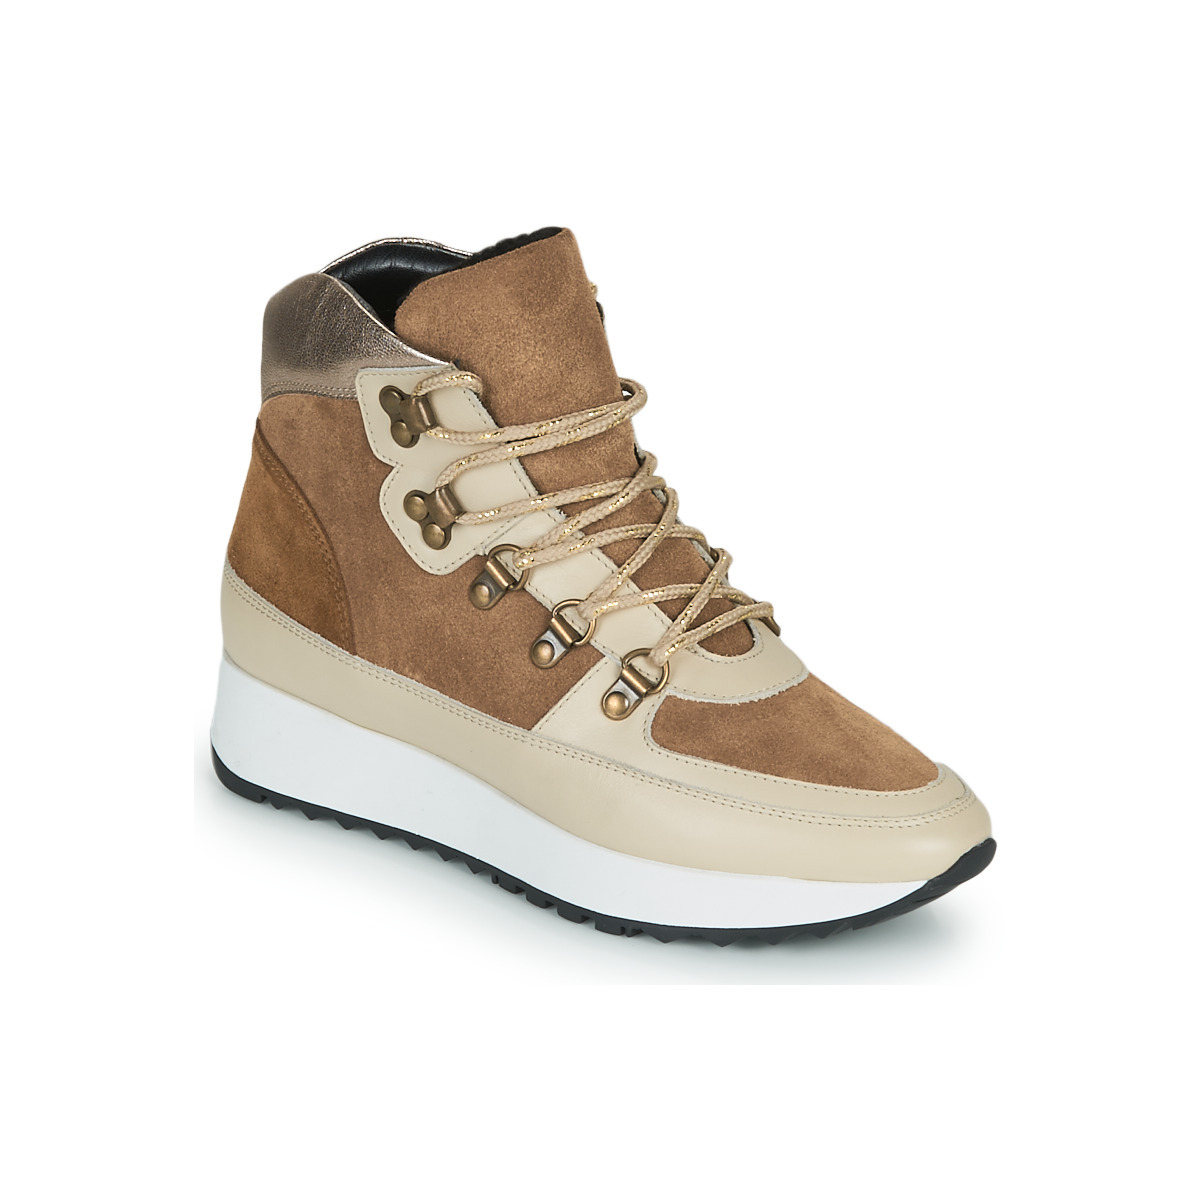 Jb Martin Brown Sneakers by Spartoo GOOFASH